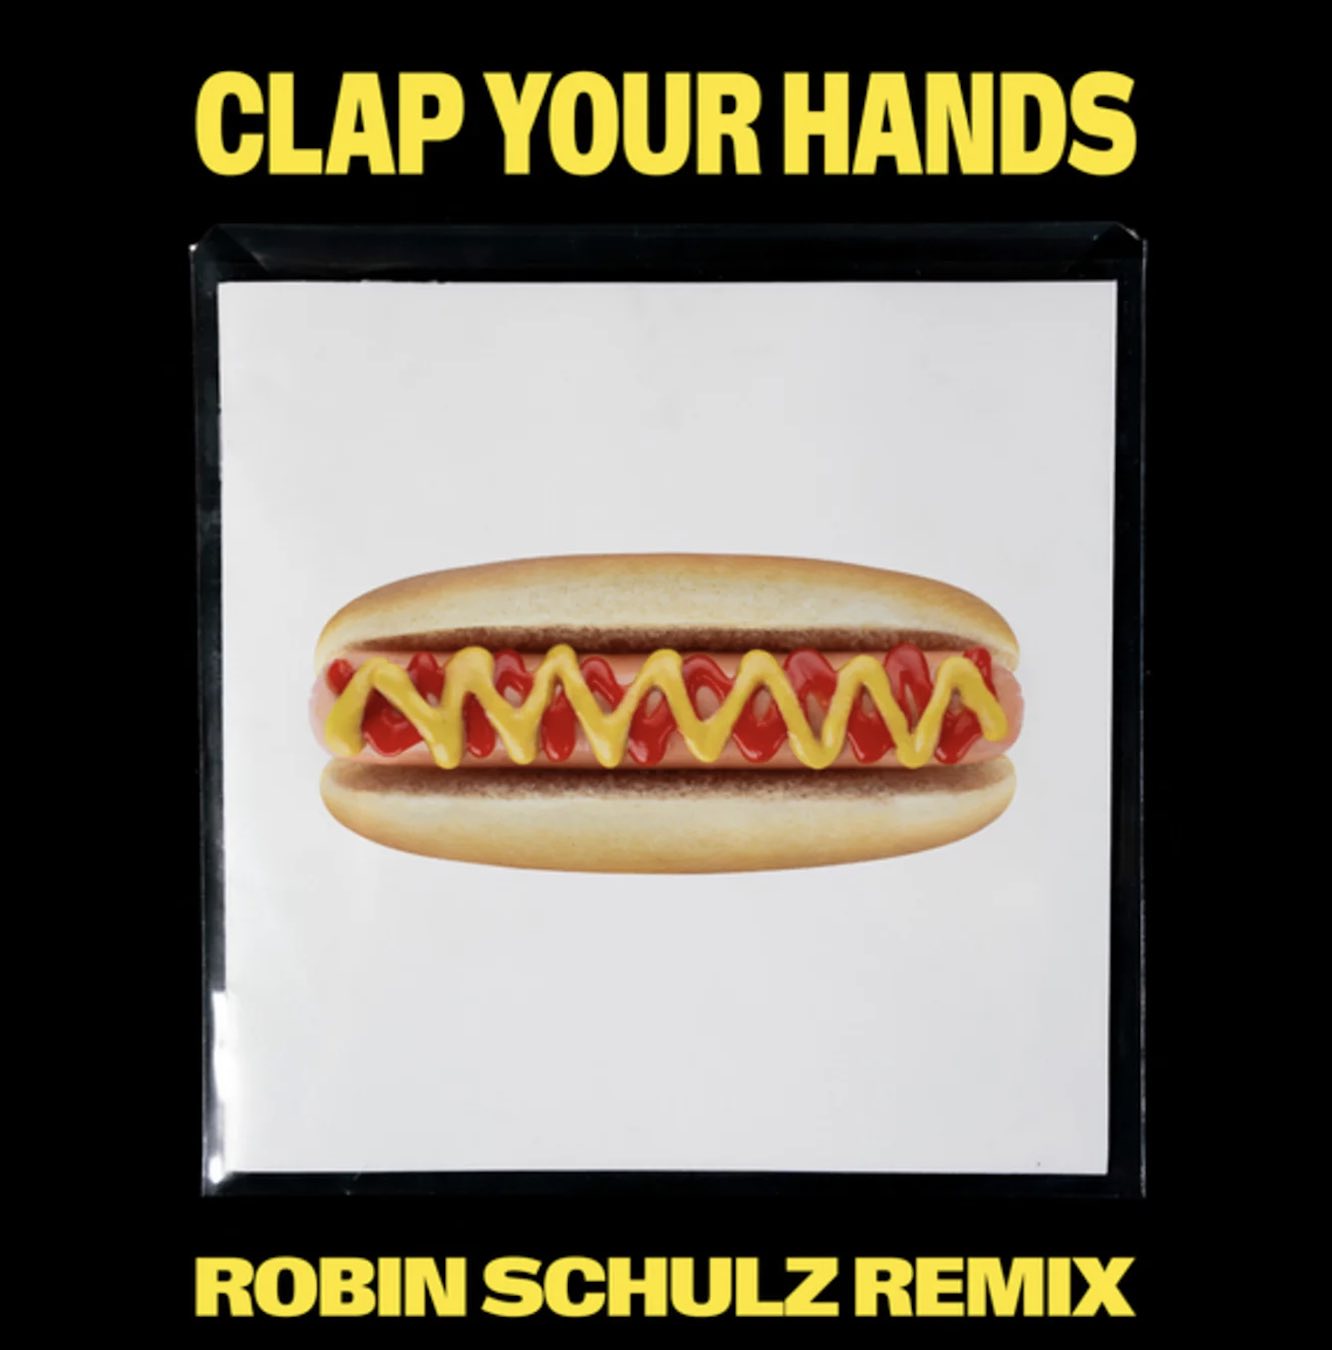 Robin schulz - remix - clap your hands - kungs -